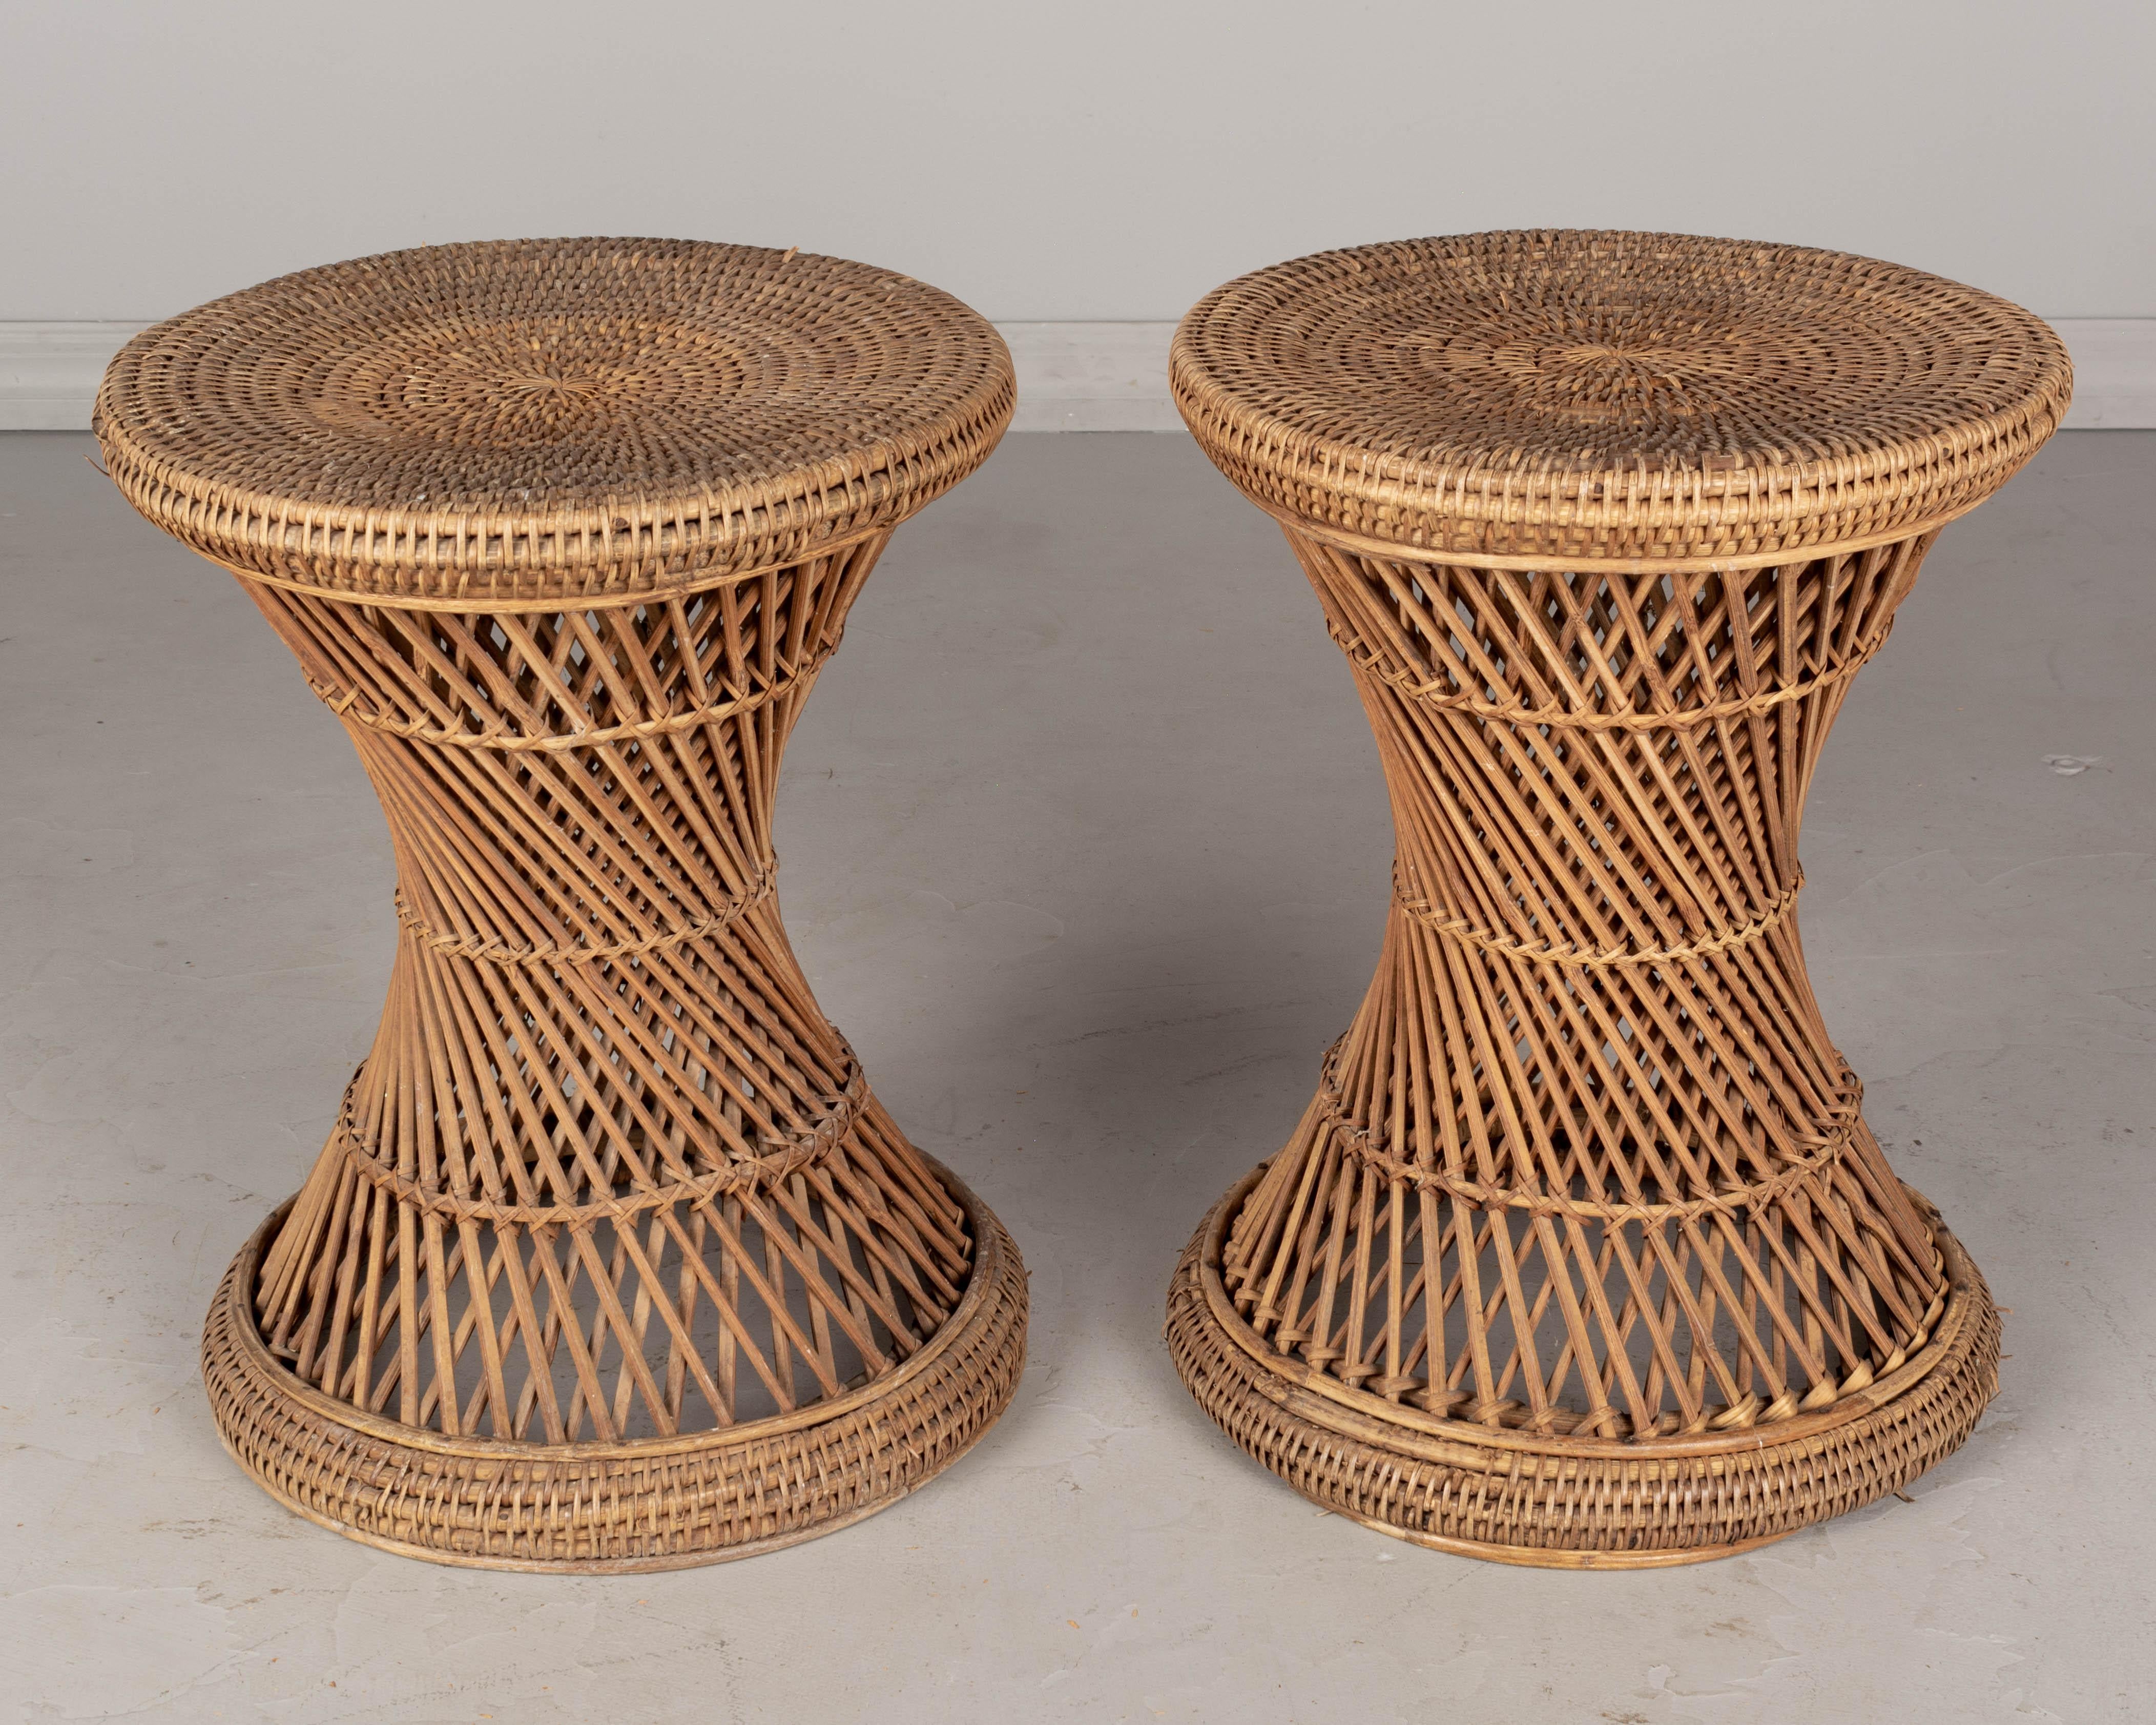 A pair of French mid century circular side tables made of hand woven rattan with handle on the side. Sturdy and in good condition. Minor losses. We have a large collection of rattan and bamboo furniture including a pair of peacock chairs.
   